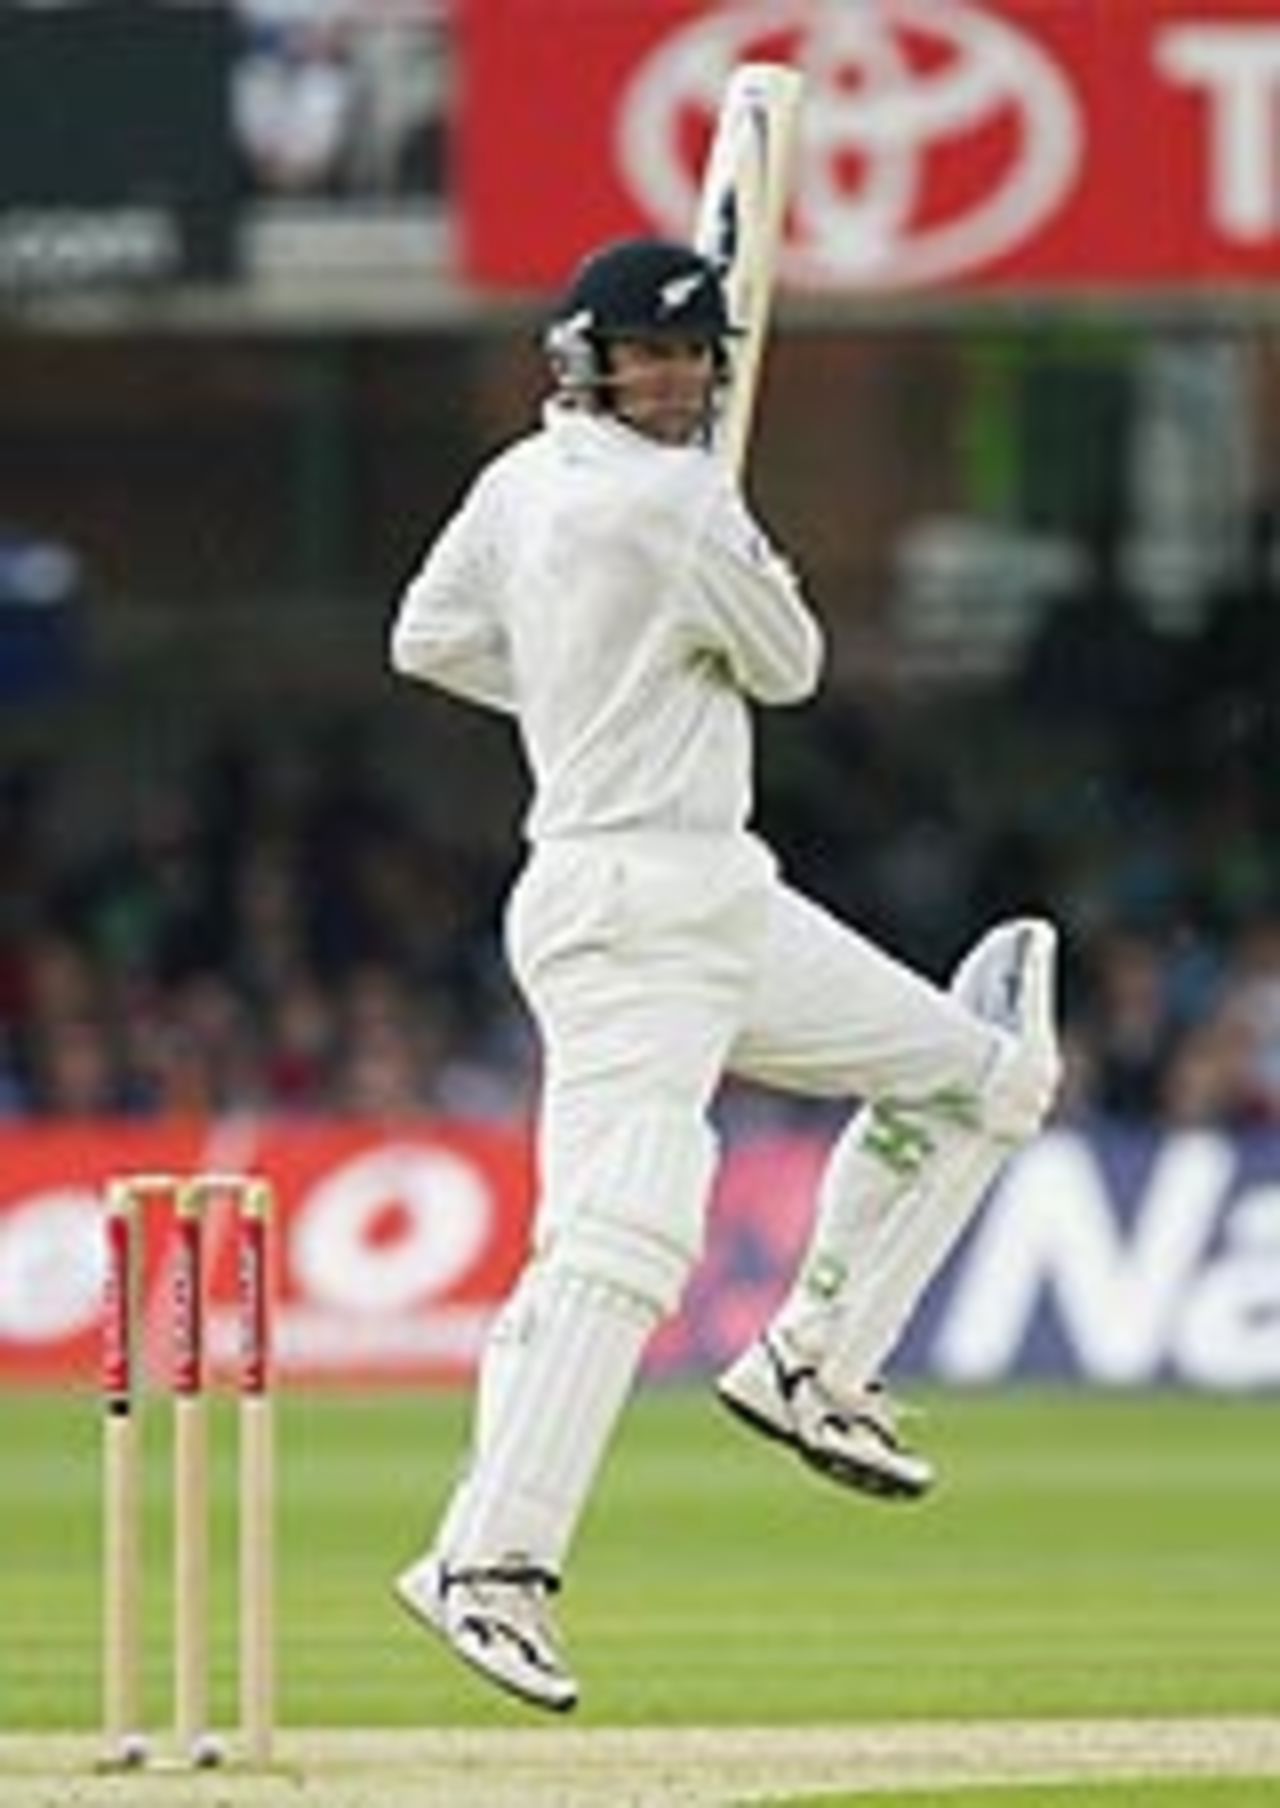 Nathan Astle cuts during his innings of 64 on the first day at Lord's, New Zealand v England, May 20, 2004